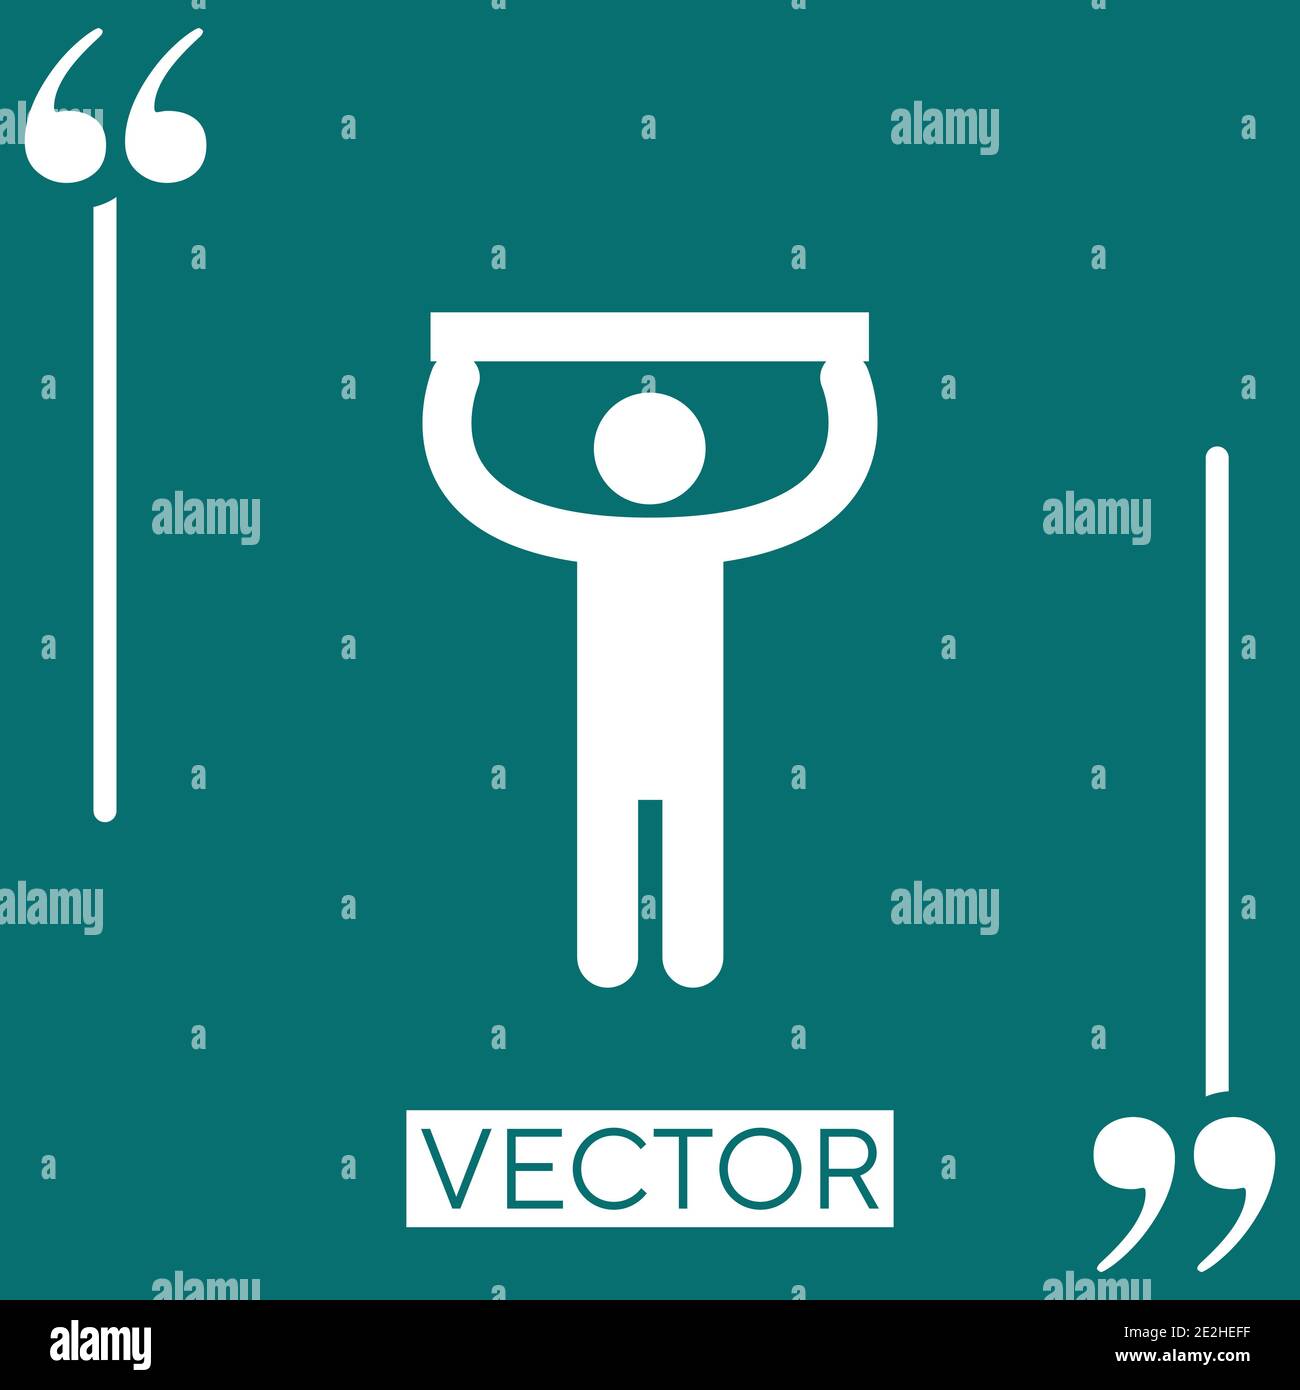 man silhouette touching ceiling vector icon Linear icon. Editable stroke line Stock Vector